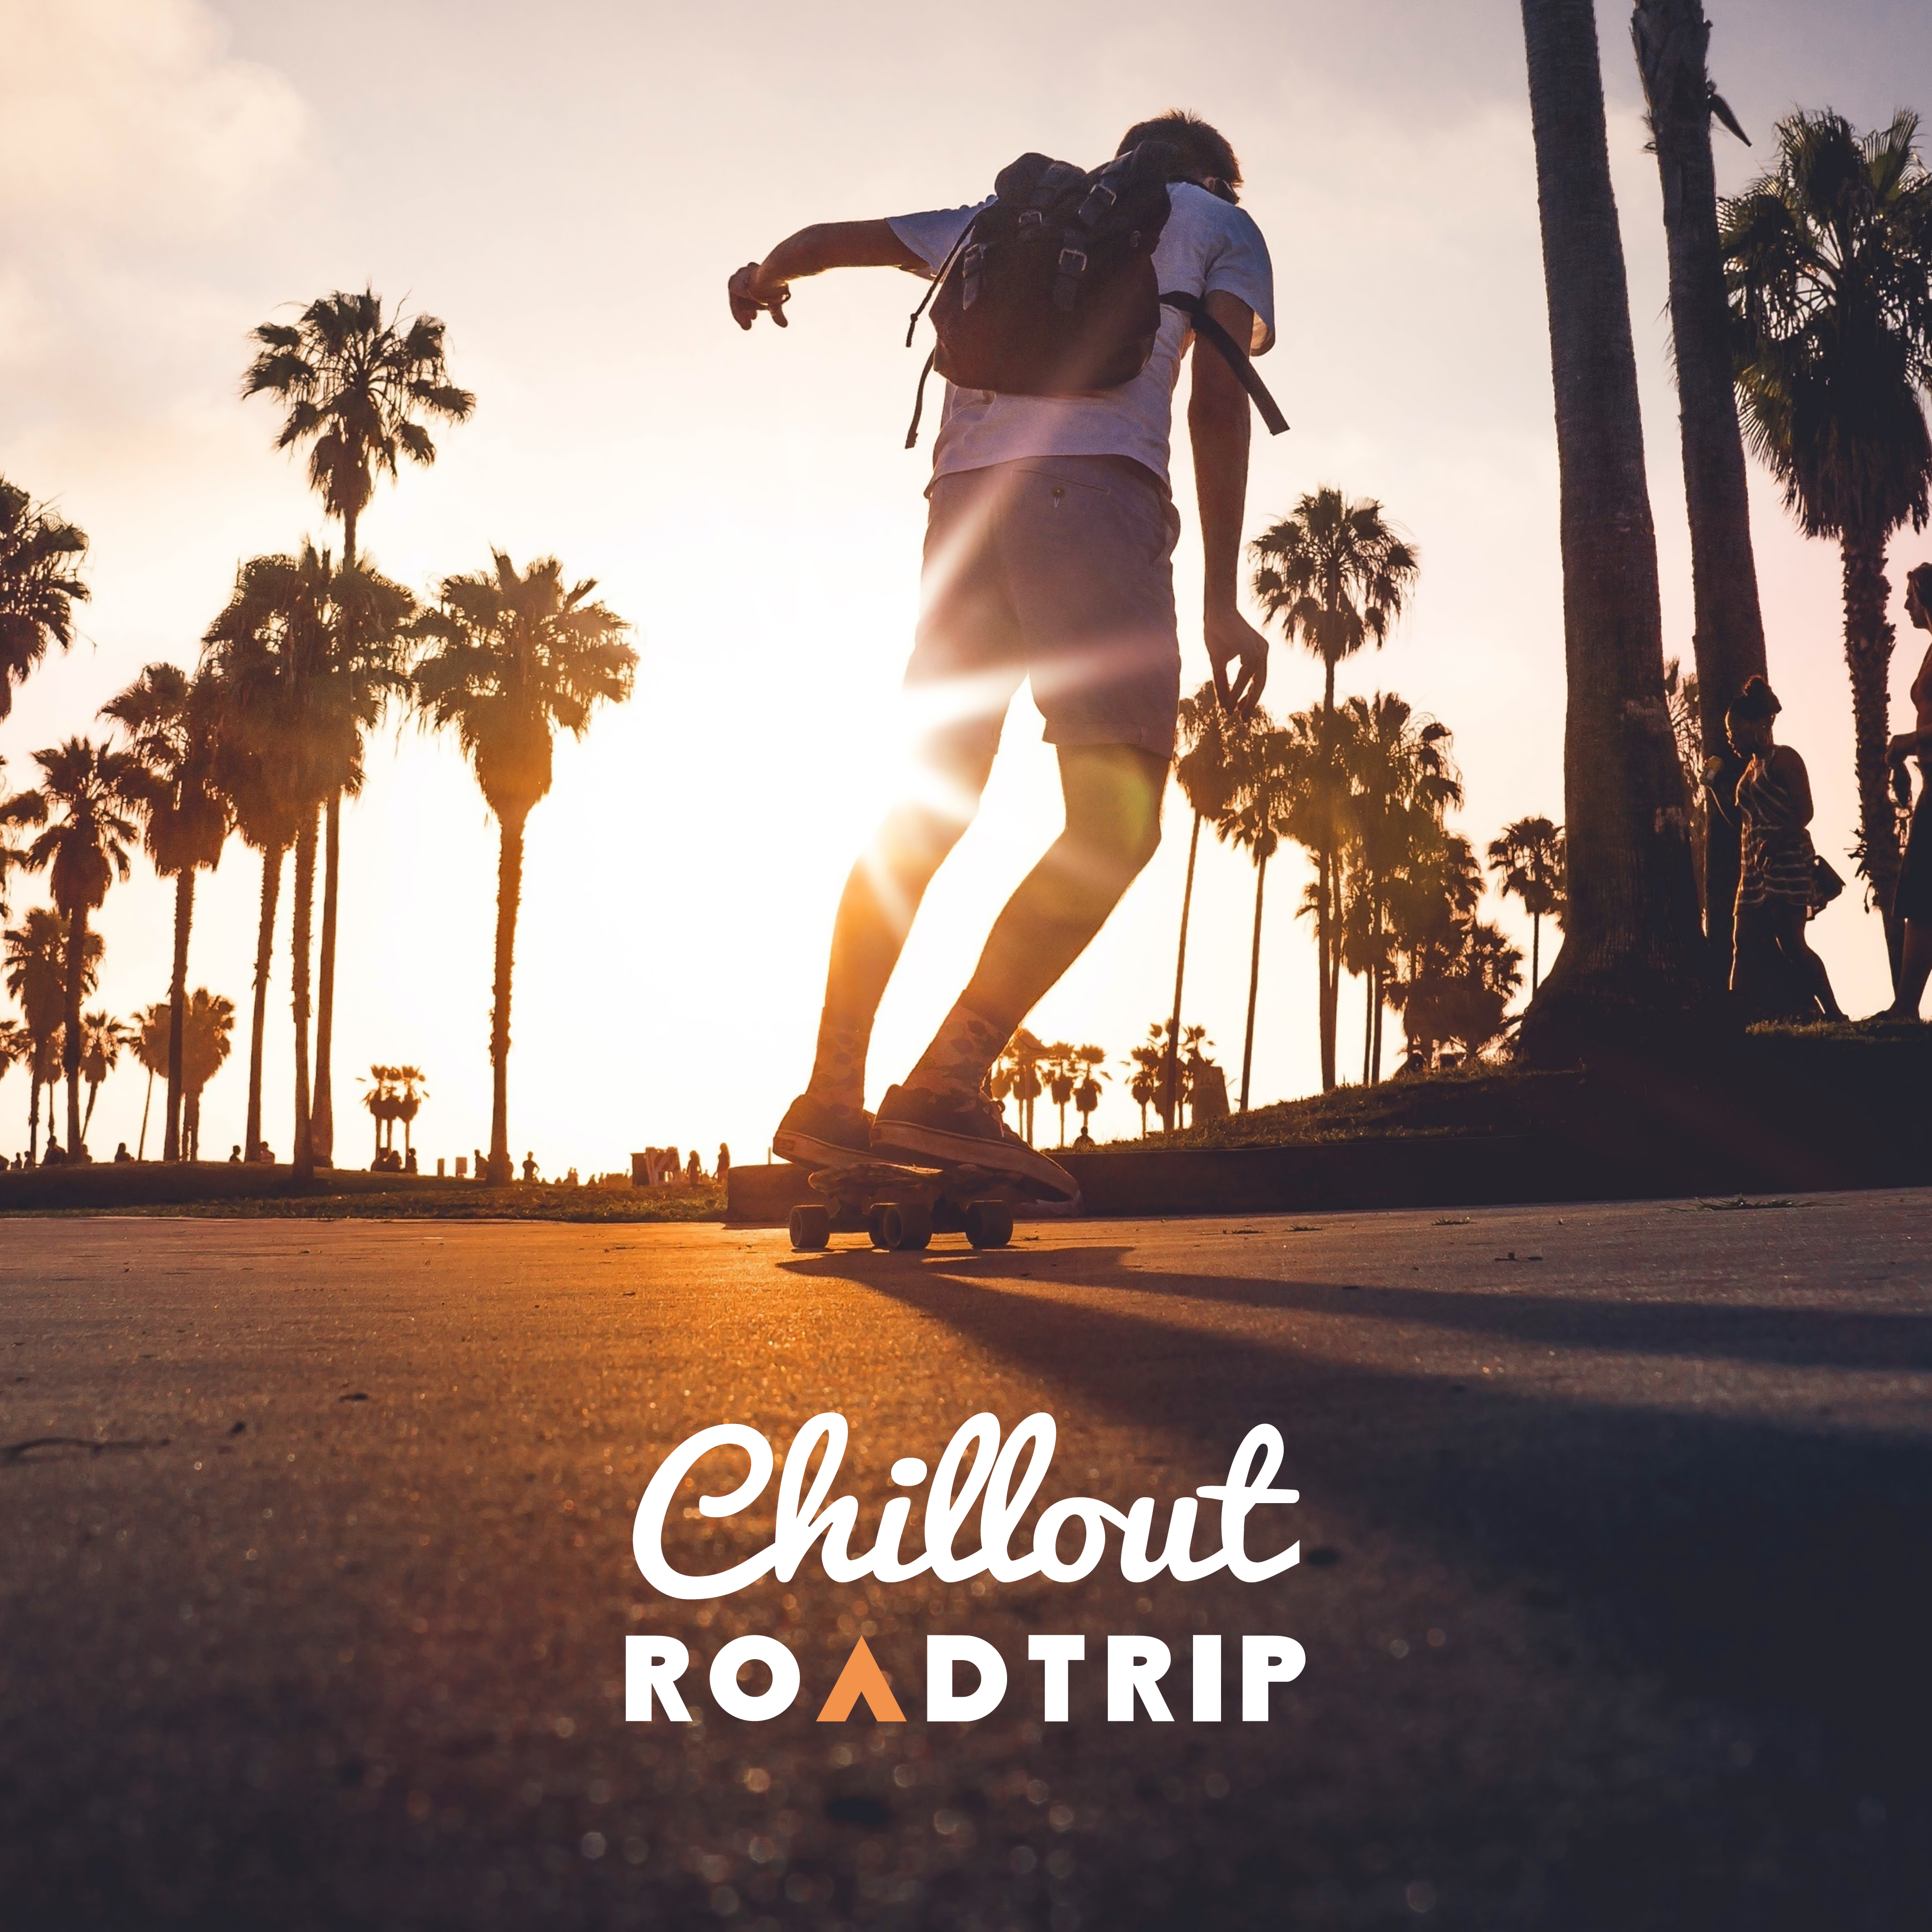 Chillout Roadtrip – Summer Music, Chill Out 2017, Ibiza, Baleares Islands, Deep Relaxation